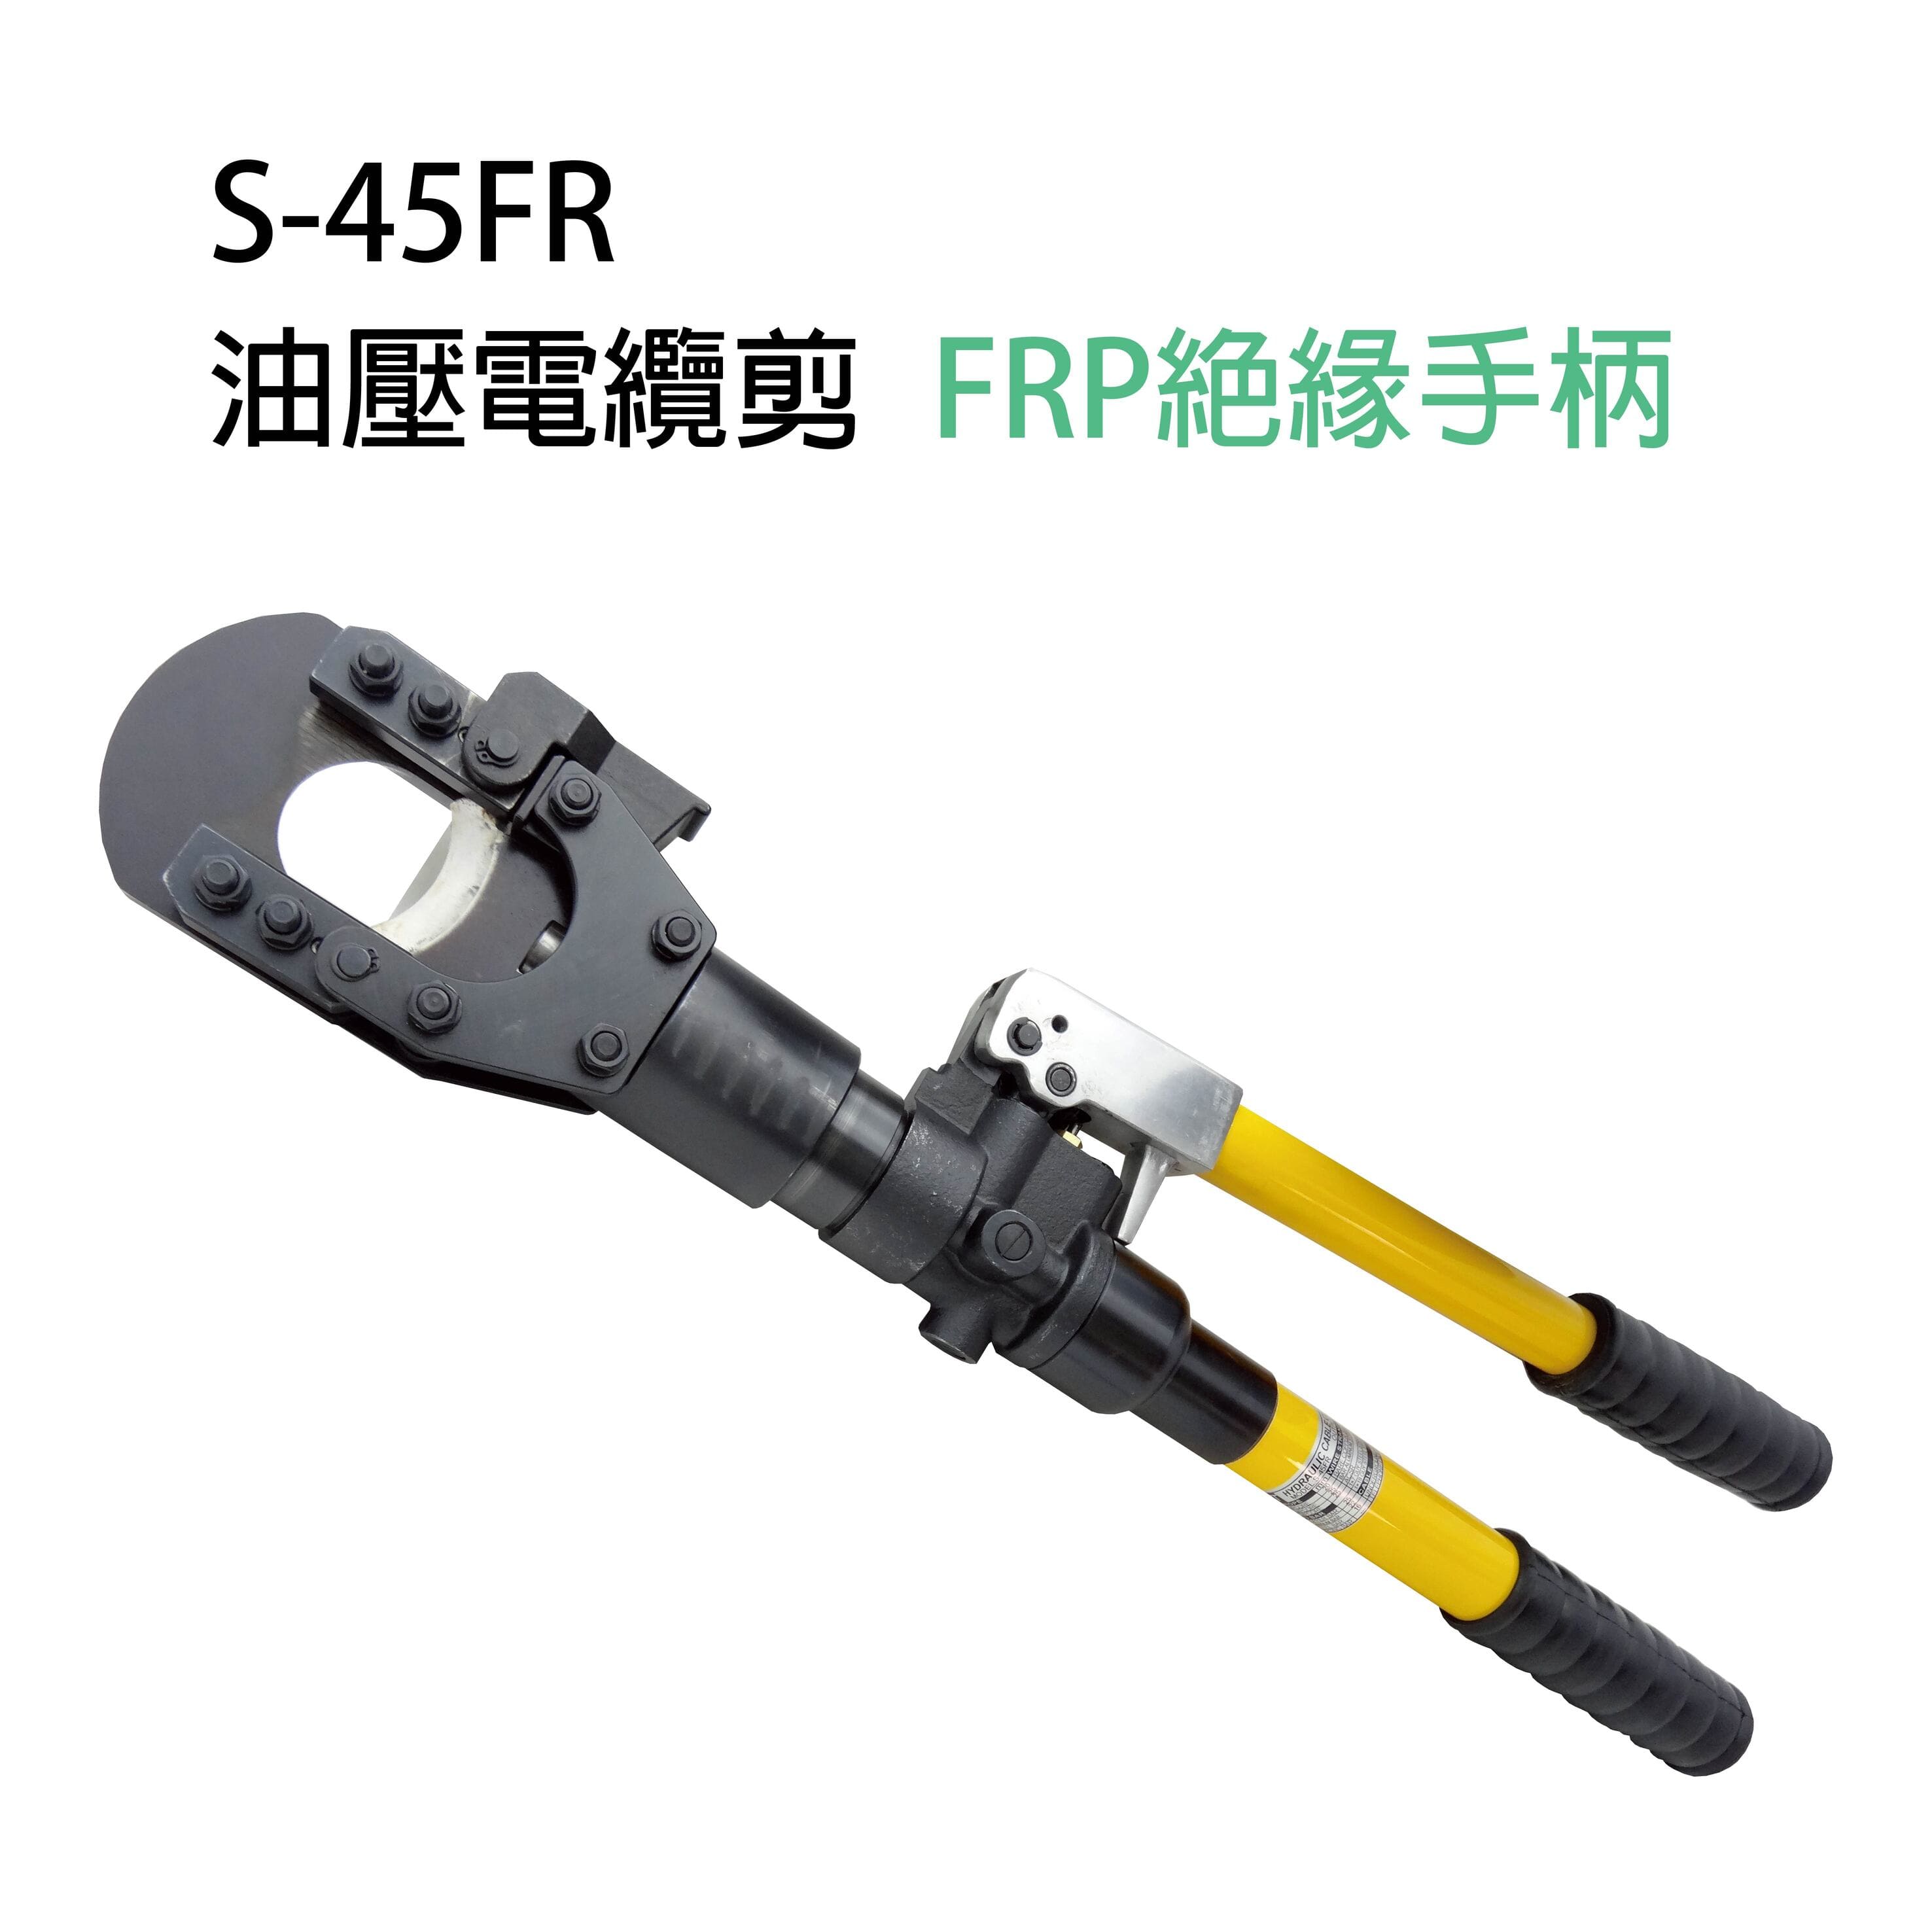 S-45FR MANUAL HYDRAULIC CABLE CUTTERS-S-45FR